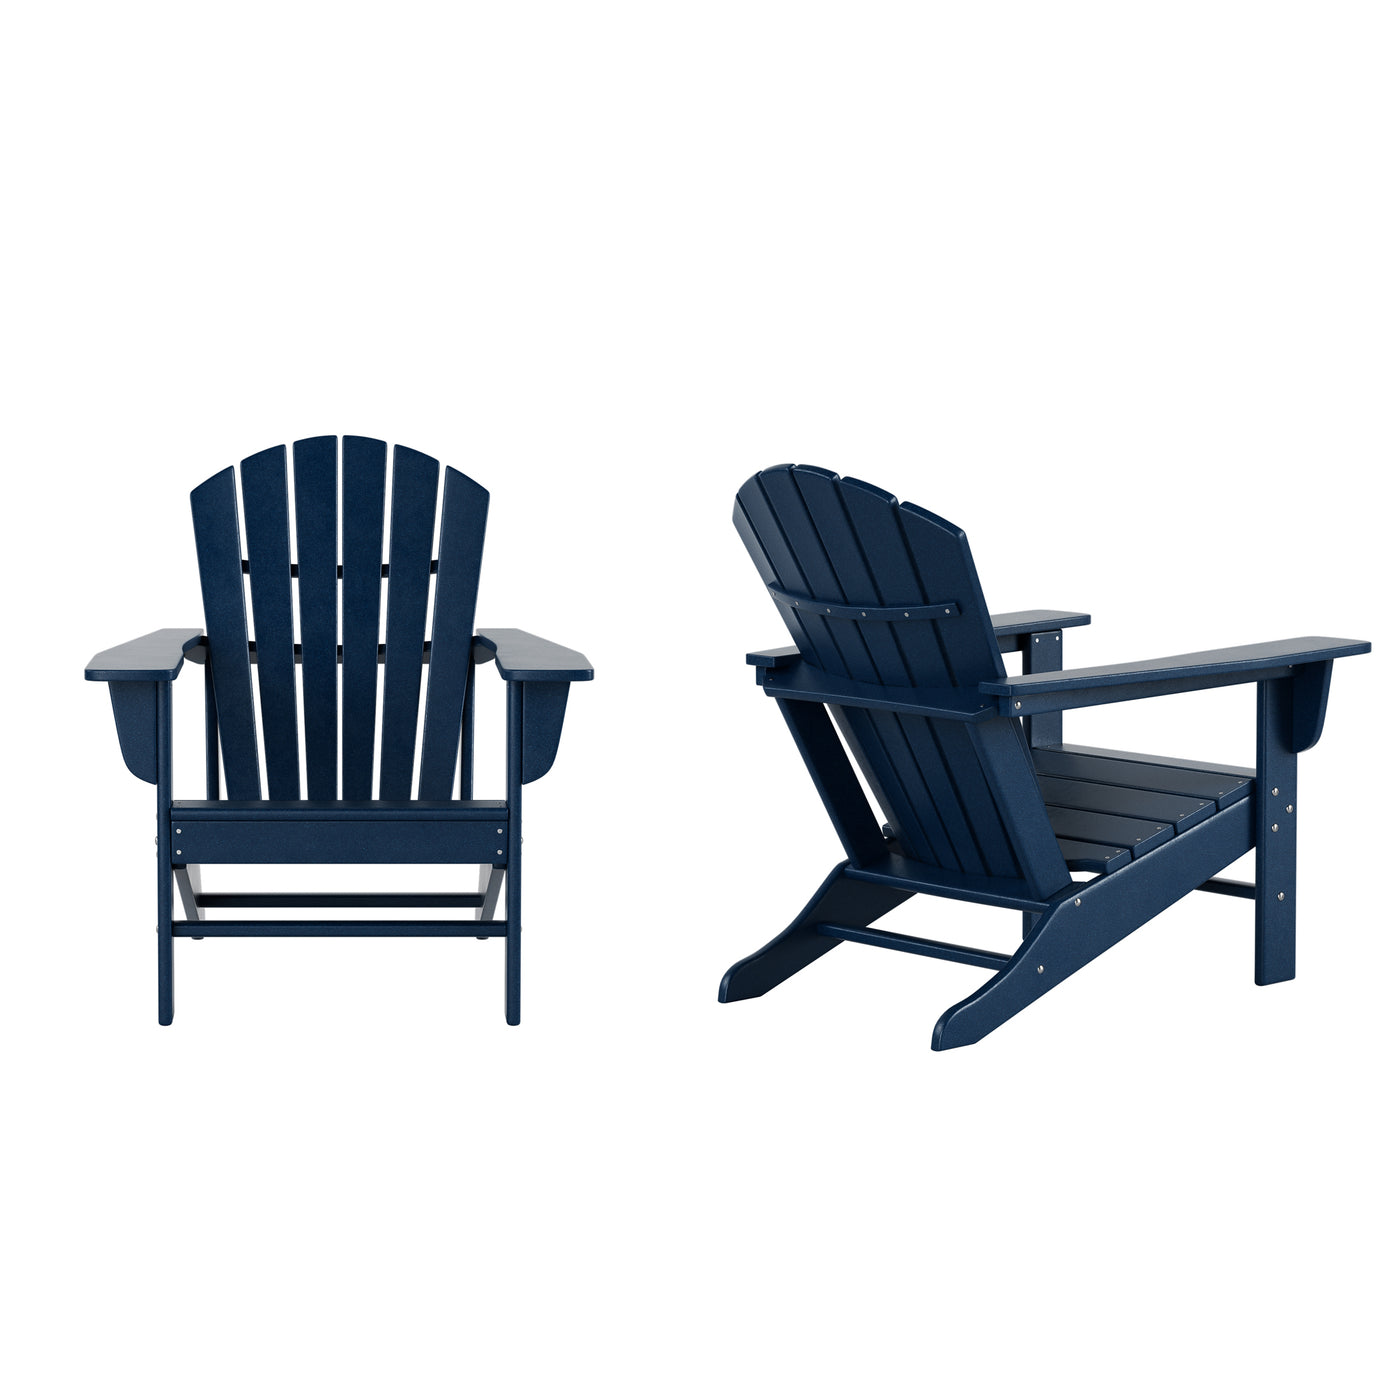 Dylan Outdoor Adirondack Chair (Set of 2)